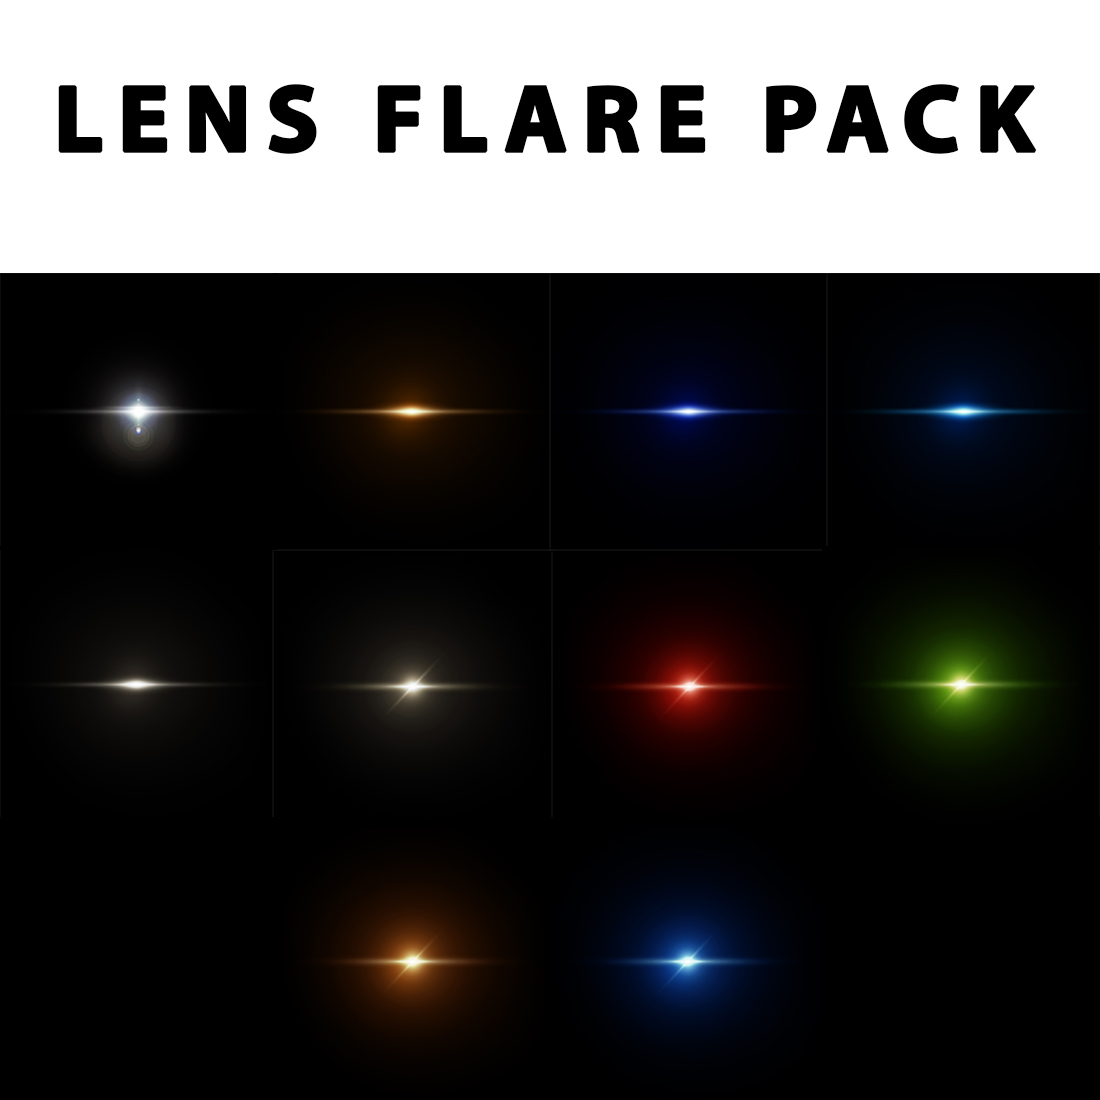 Lens Flare Pack preview image.